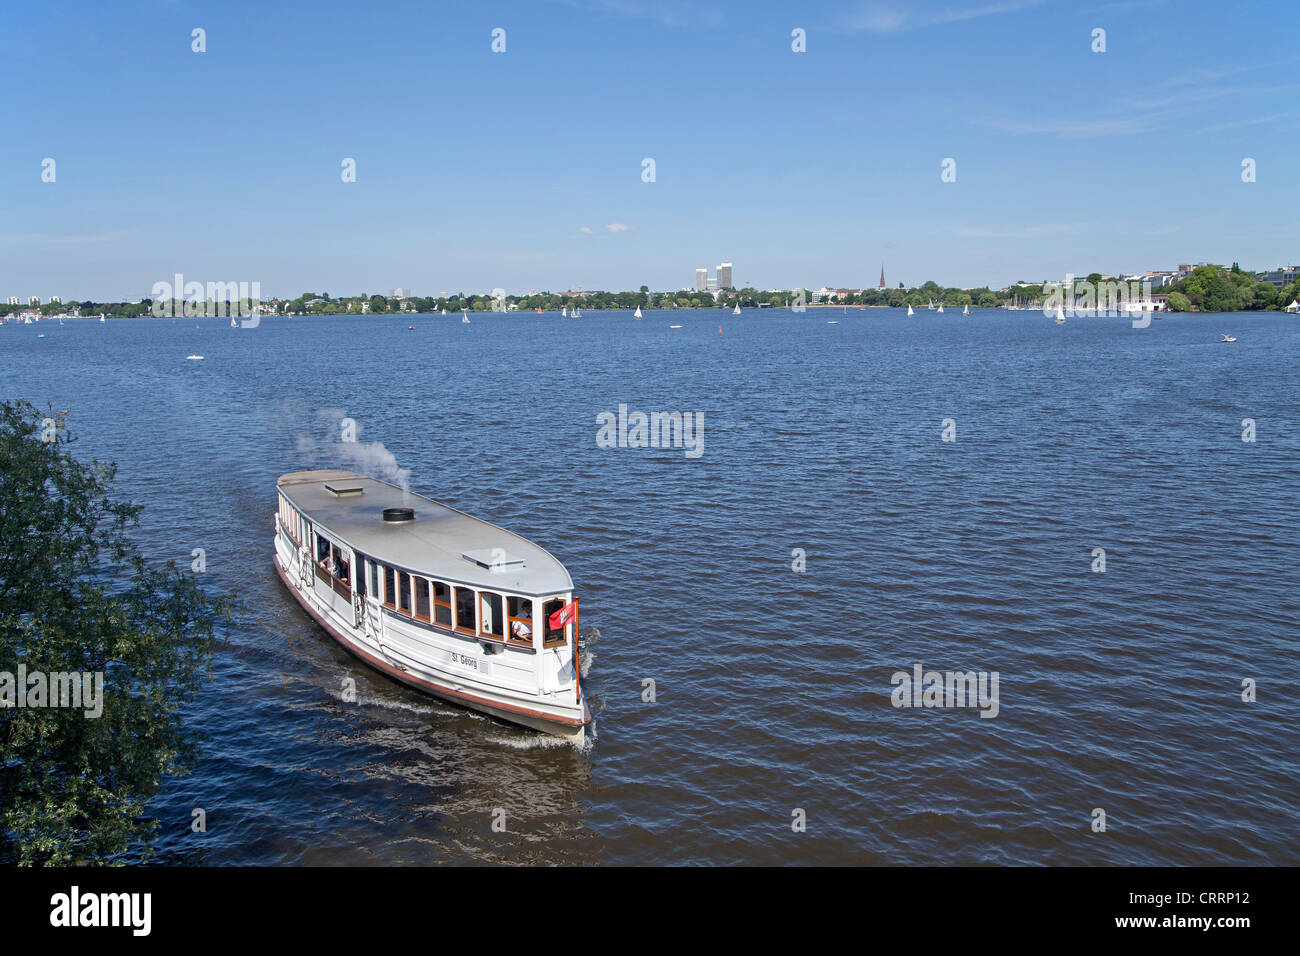 excursion boat, Aussenalster (outer Lake Alster), Hamburg, Germany Stock Photo